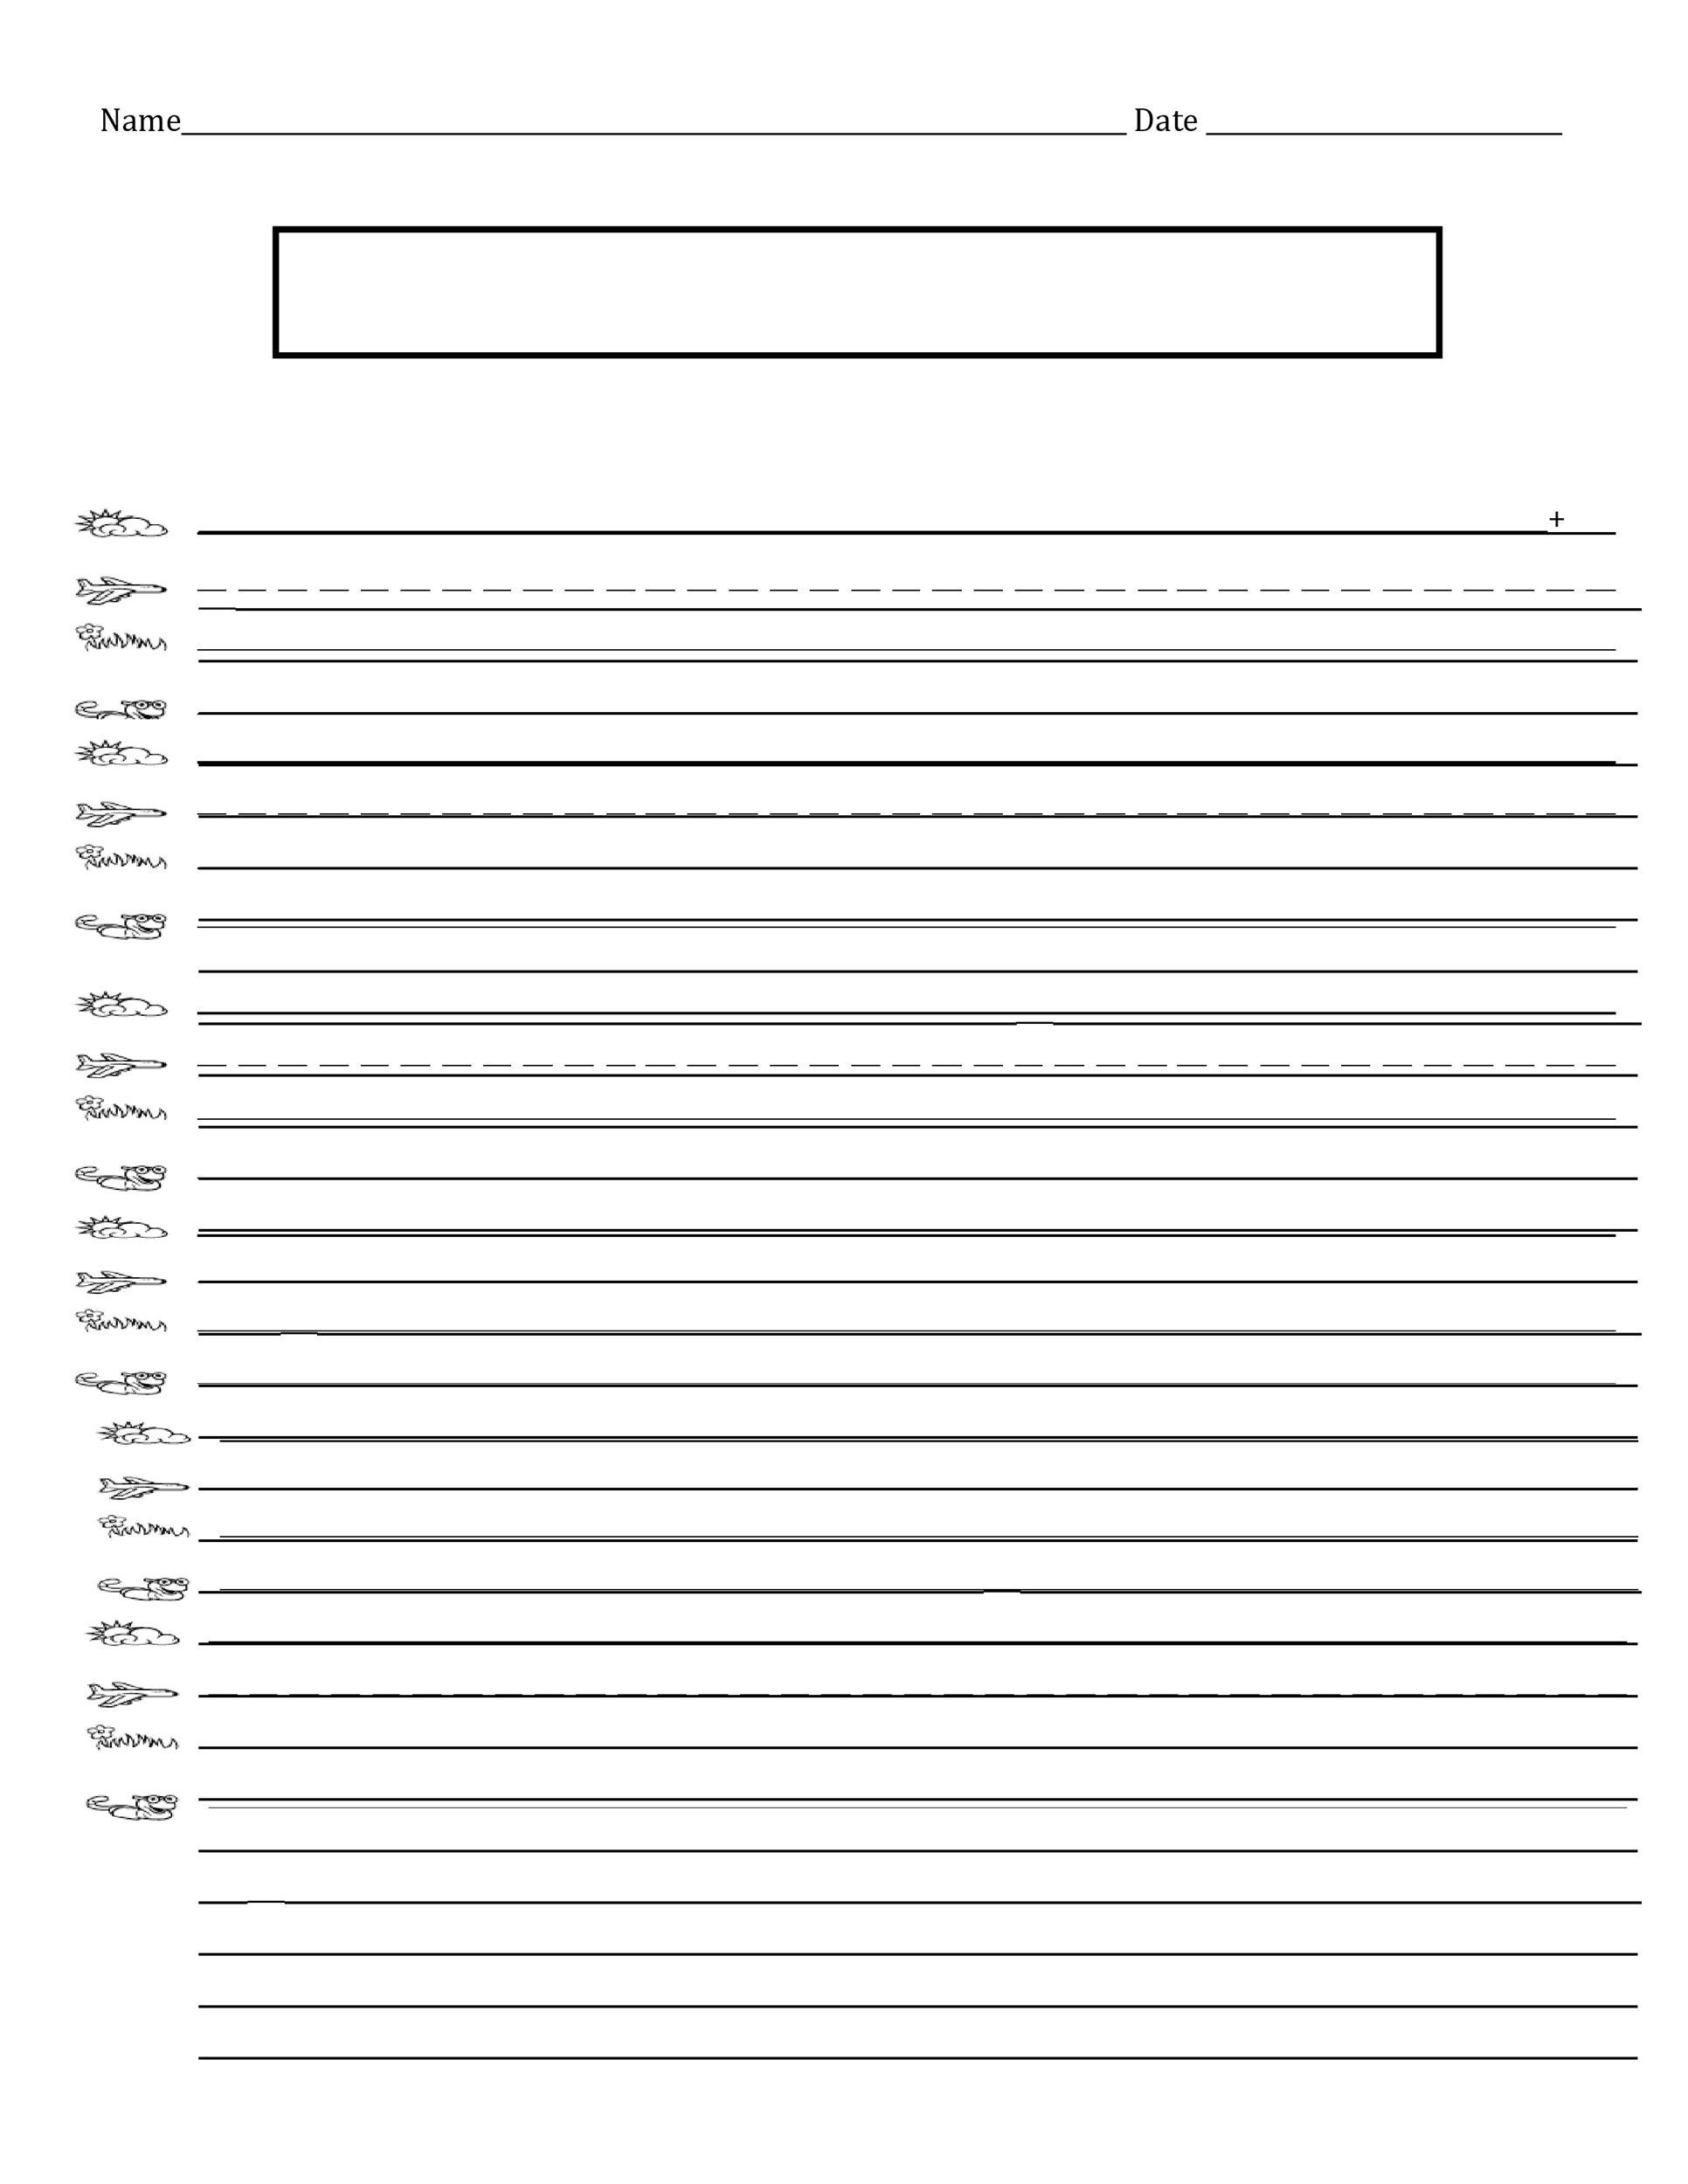 download-printable-lined-paper-template-narrow-ruled-14-inch-pdf-printable-lined-paper-jpg-and